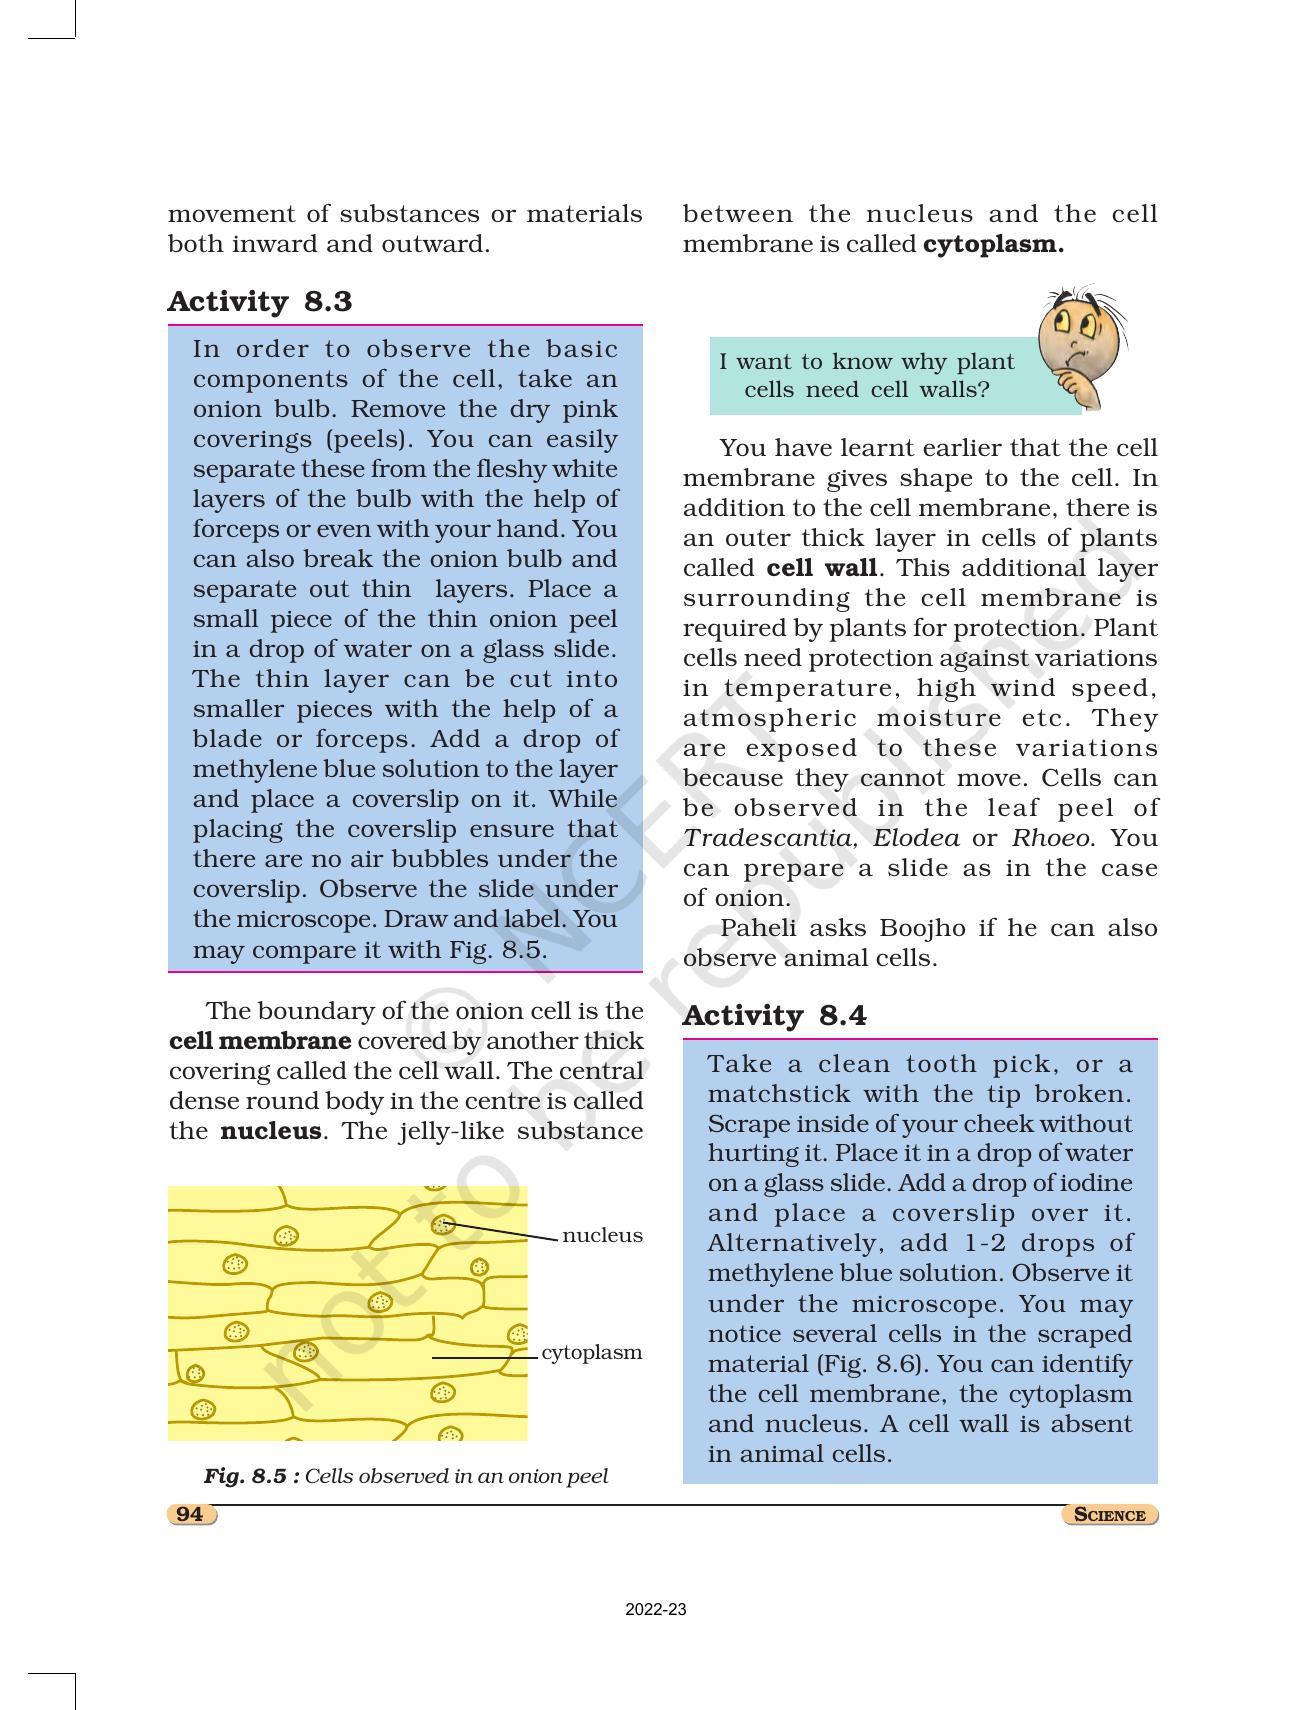 NCERT Book for Class 8 Science Chapter 8 Cell Structure and Functions - Page 5